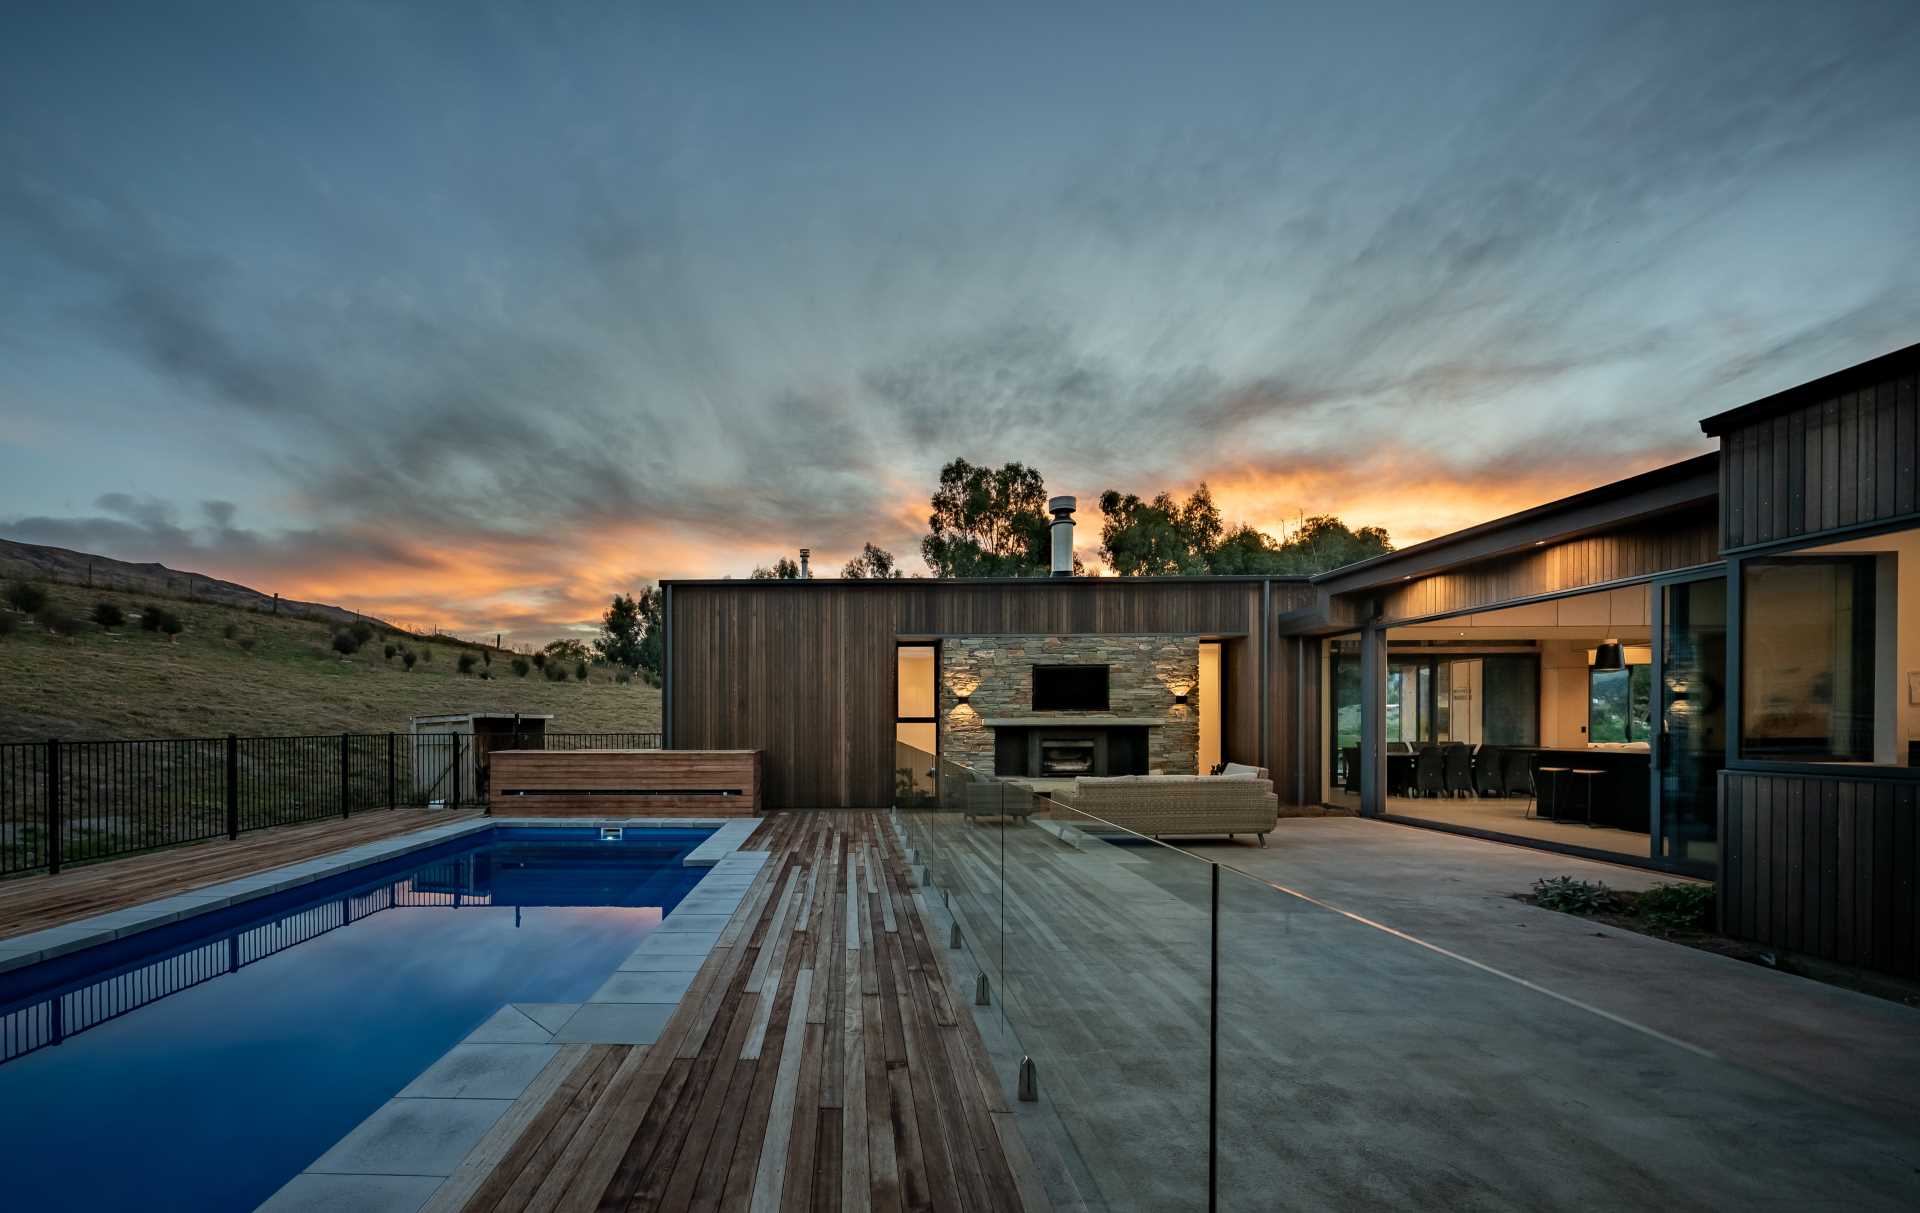 A modern house with a sheltered patio and swimming pool.